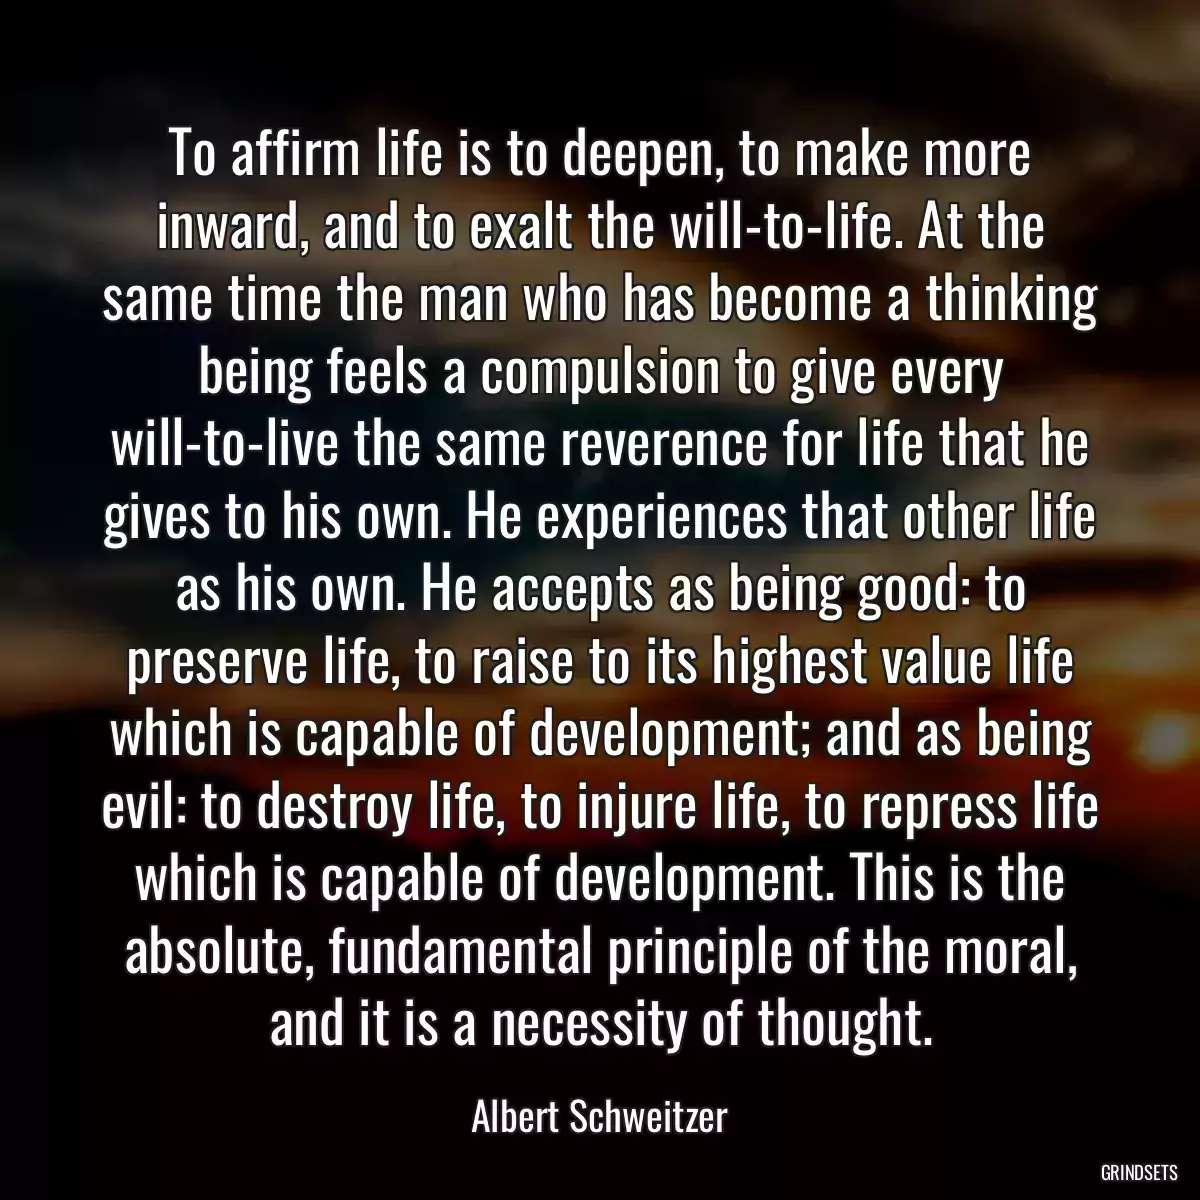 To affirm life is to deepen, to make more inward, and to exalt the will-to-life. At the same time the man who has become a thinking being feels a compulsion to give every will-to-live the same reverence for life that he gives to his own. He experiences that other life as his own. He accepts as being good: to preserve life, to raise to its highest value life which is capable of development; and as being evil: to destroy life, to injure life, to repress life which is capable of development. This is the absolute, fundamental principle of the moral, and it is a necessity of thought.